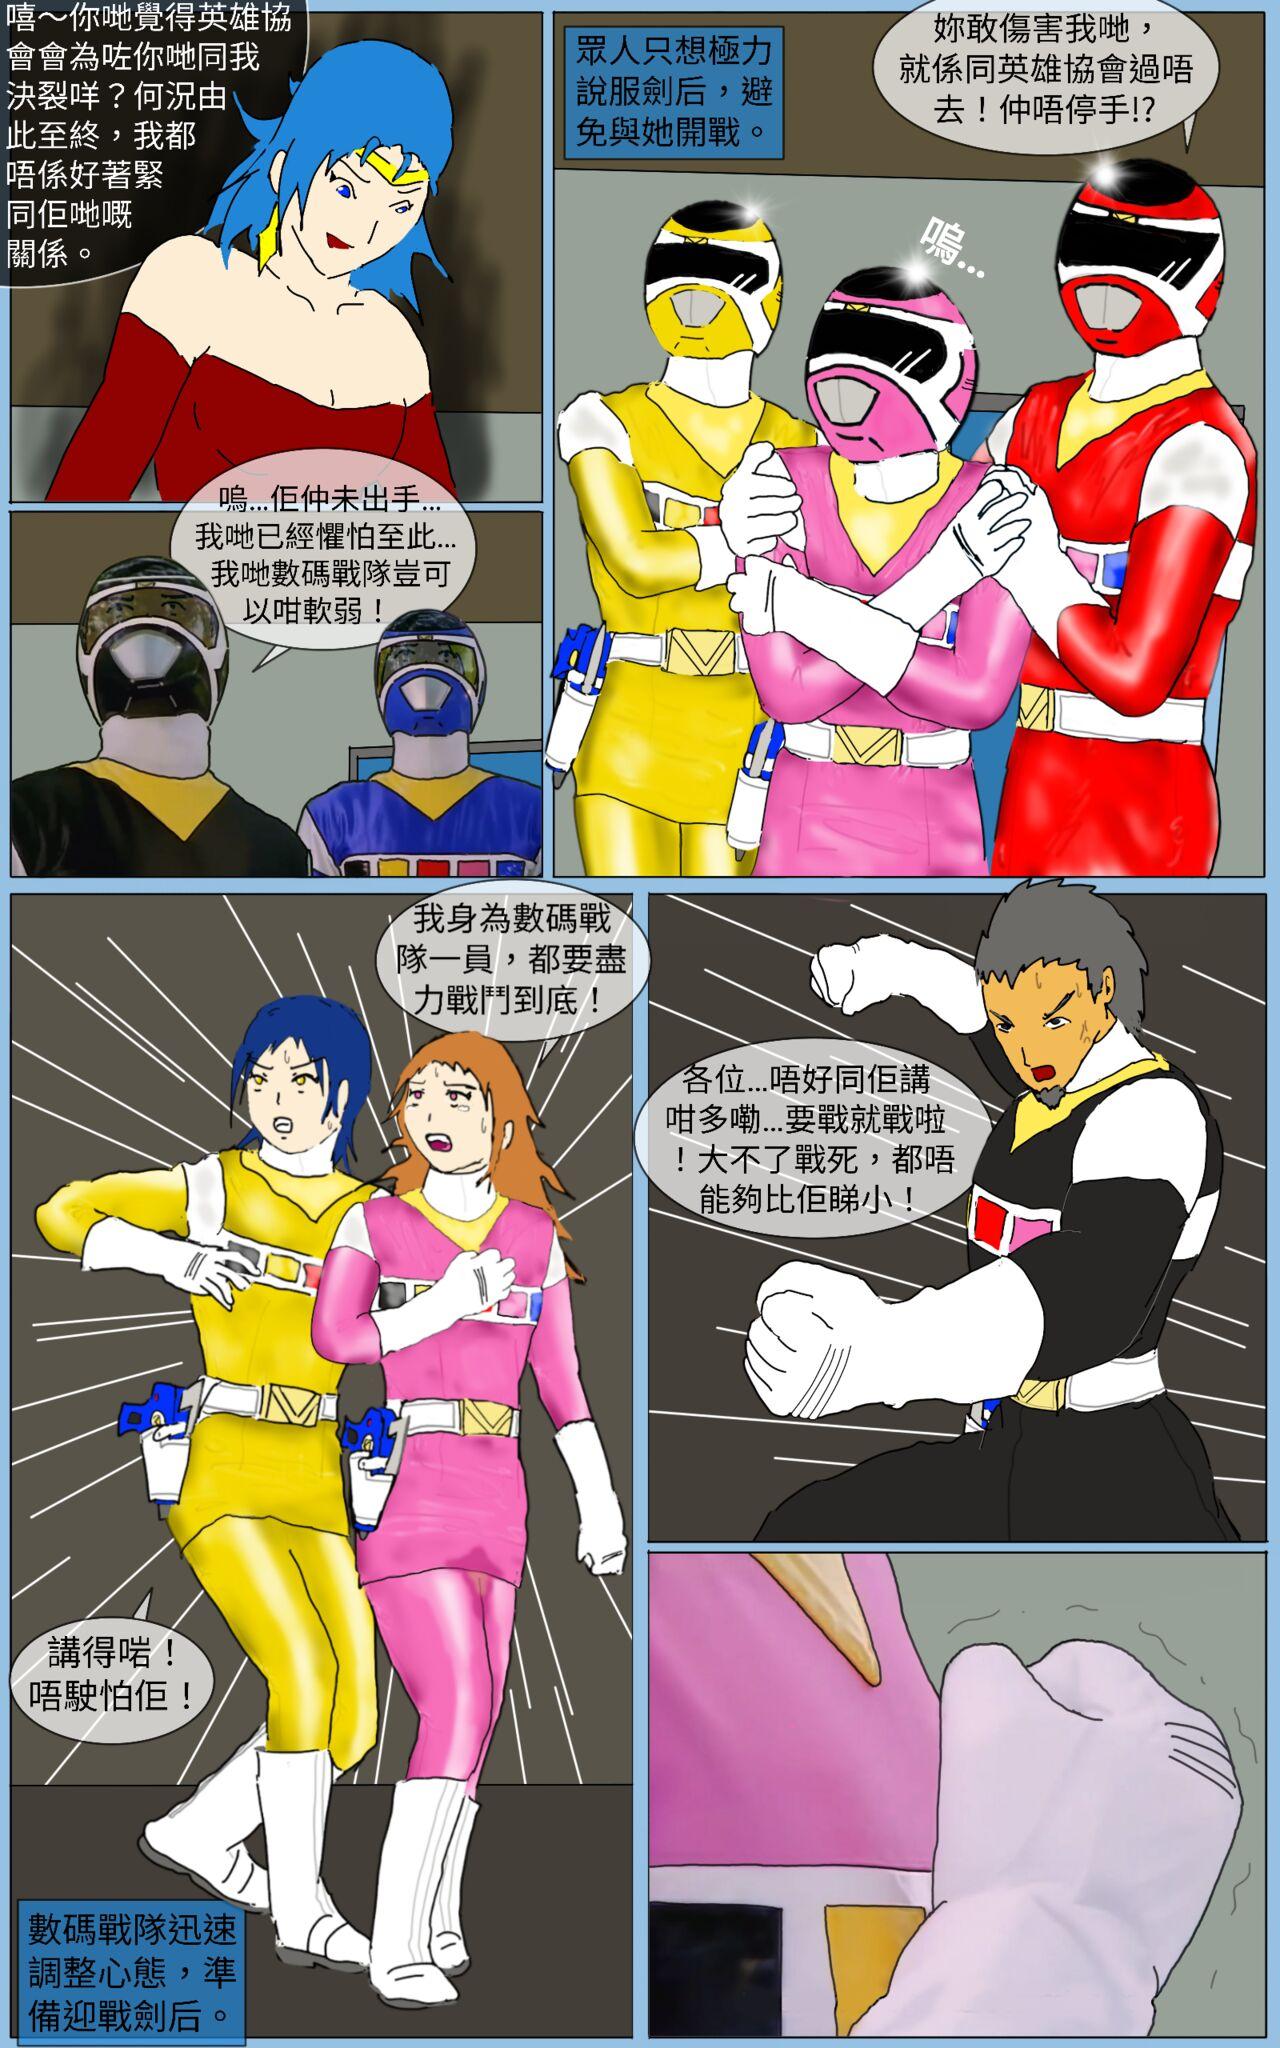 Family Roleplay Mission 32 - Super sentai Mojada - Page 8